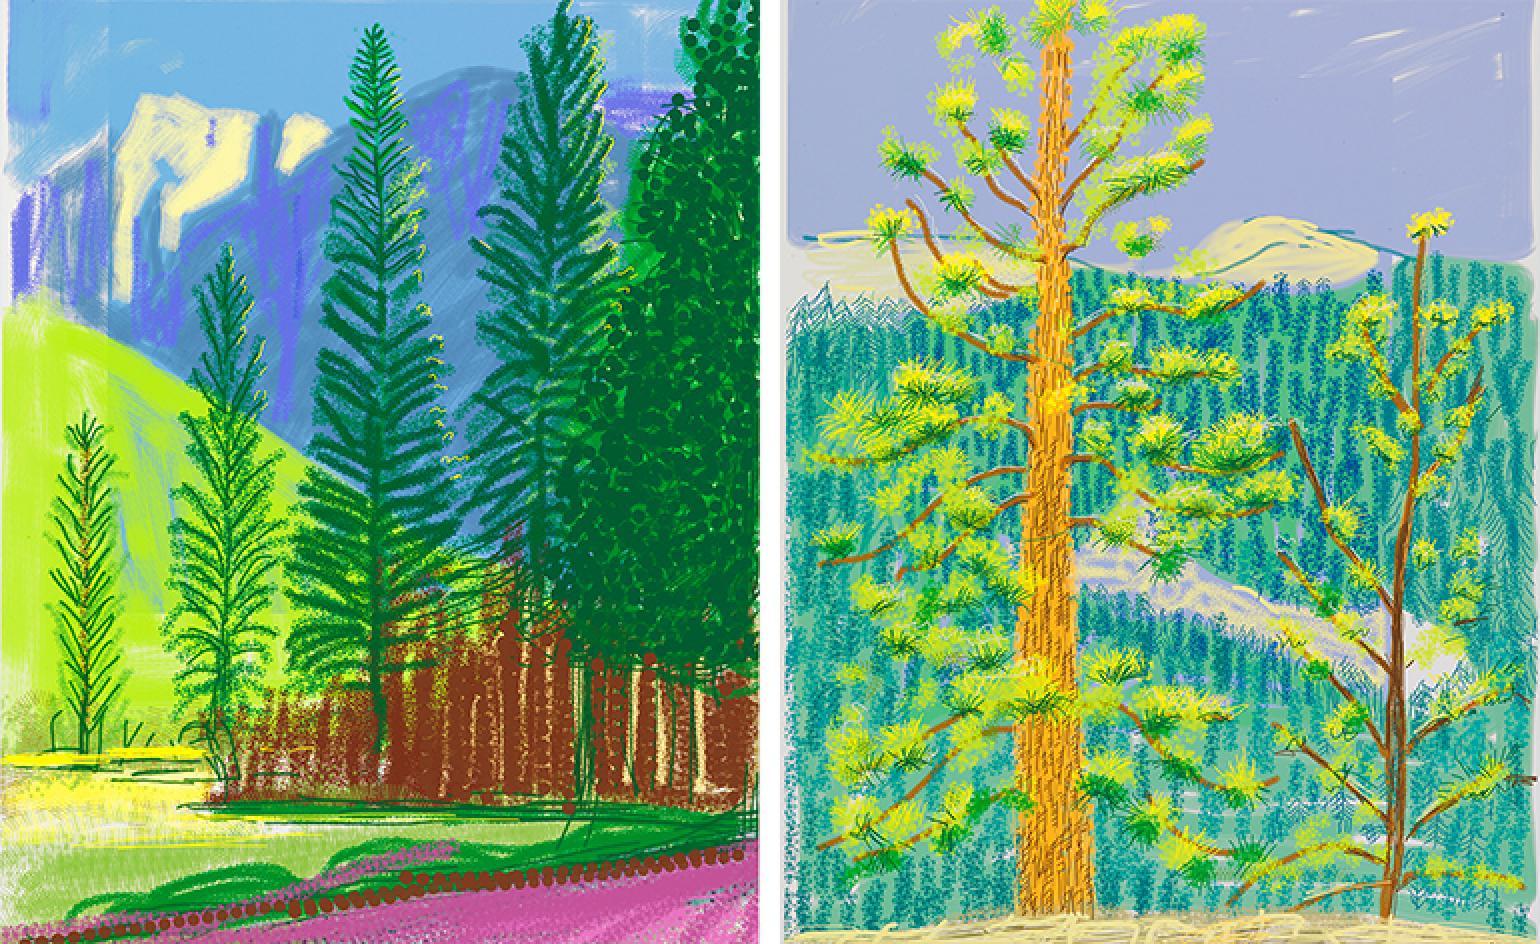 David Hockney's 'The Yosemite Suite', at Pace Gallery NY. Wallpaper*